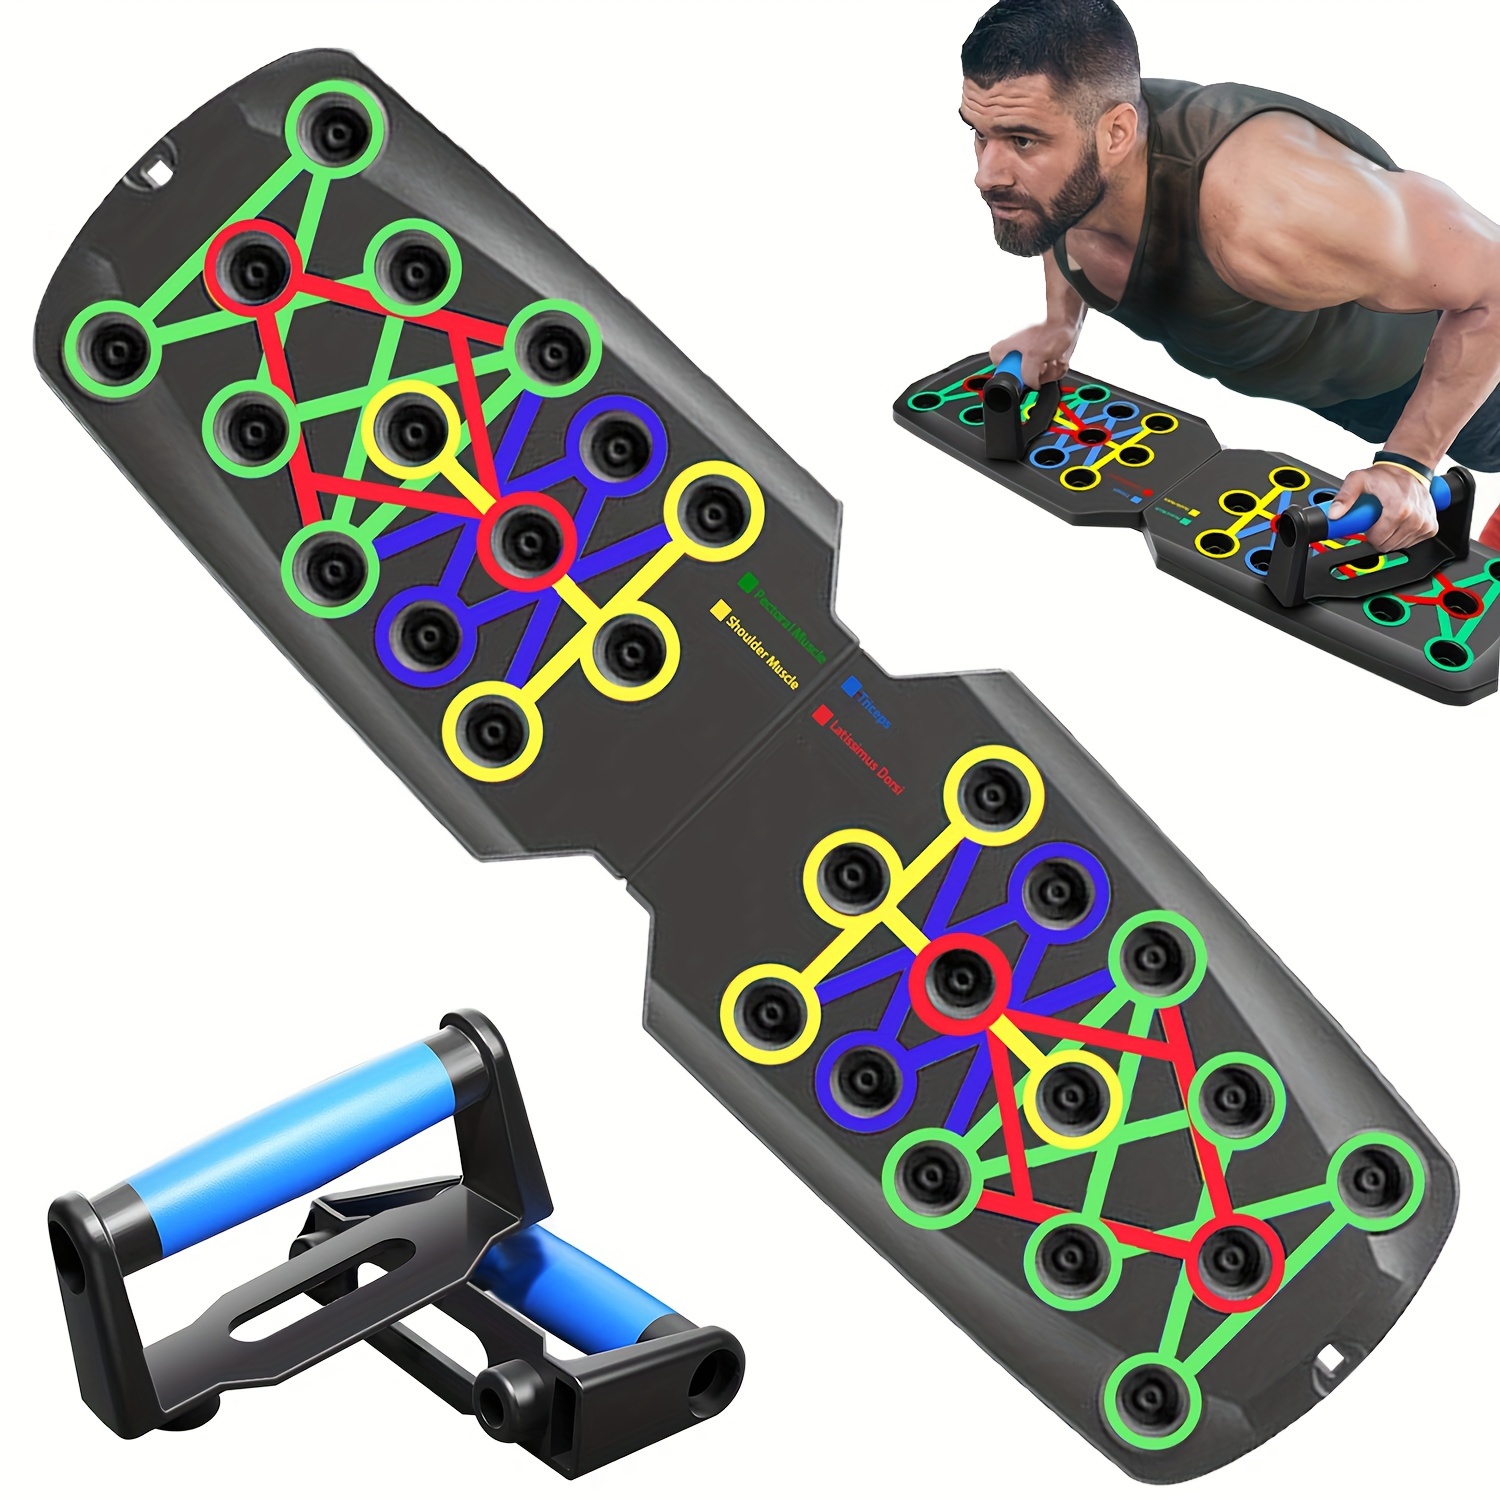 LALAHIGH Portable Push Up Board, Multi-Function Foldable Push Up Bars, Push  Up Handles for Floor,Professional Push Up Strength Training Equipment For  Man and Wo…